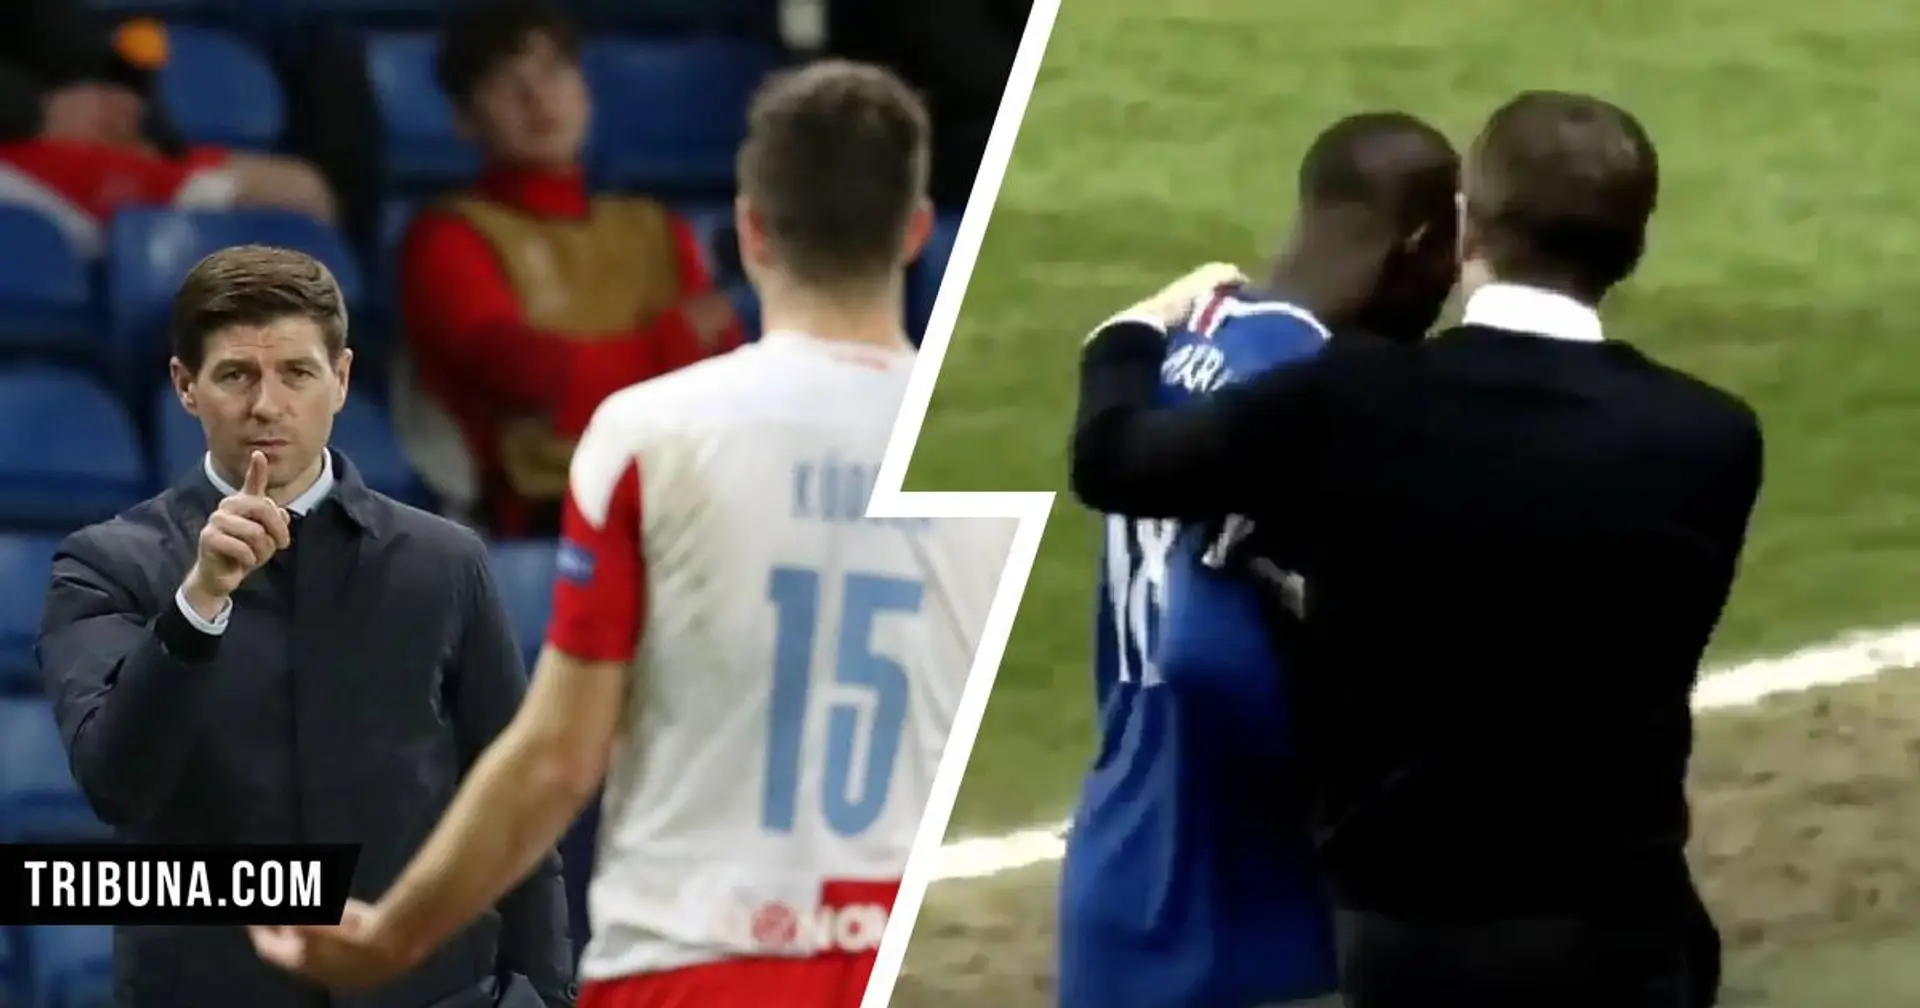 Gerrard beautifully comforts Rangers player Kamara after being subjected to racist abuse in Slavia Prague game